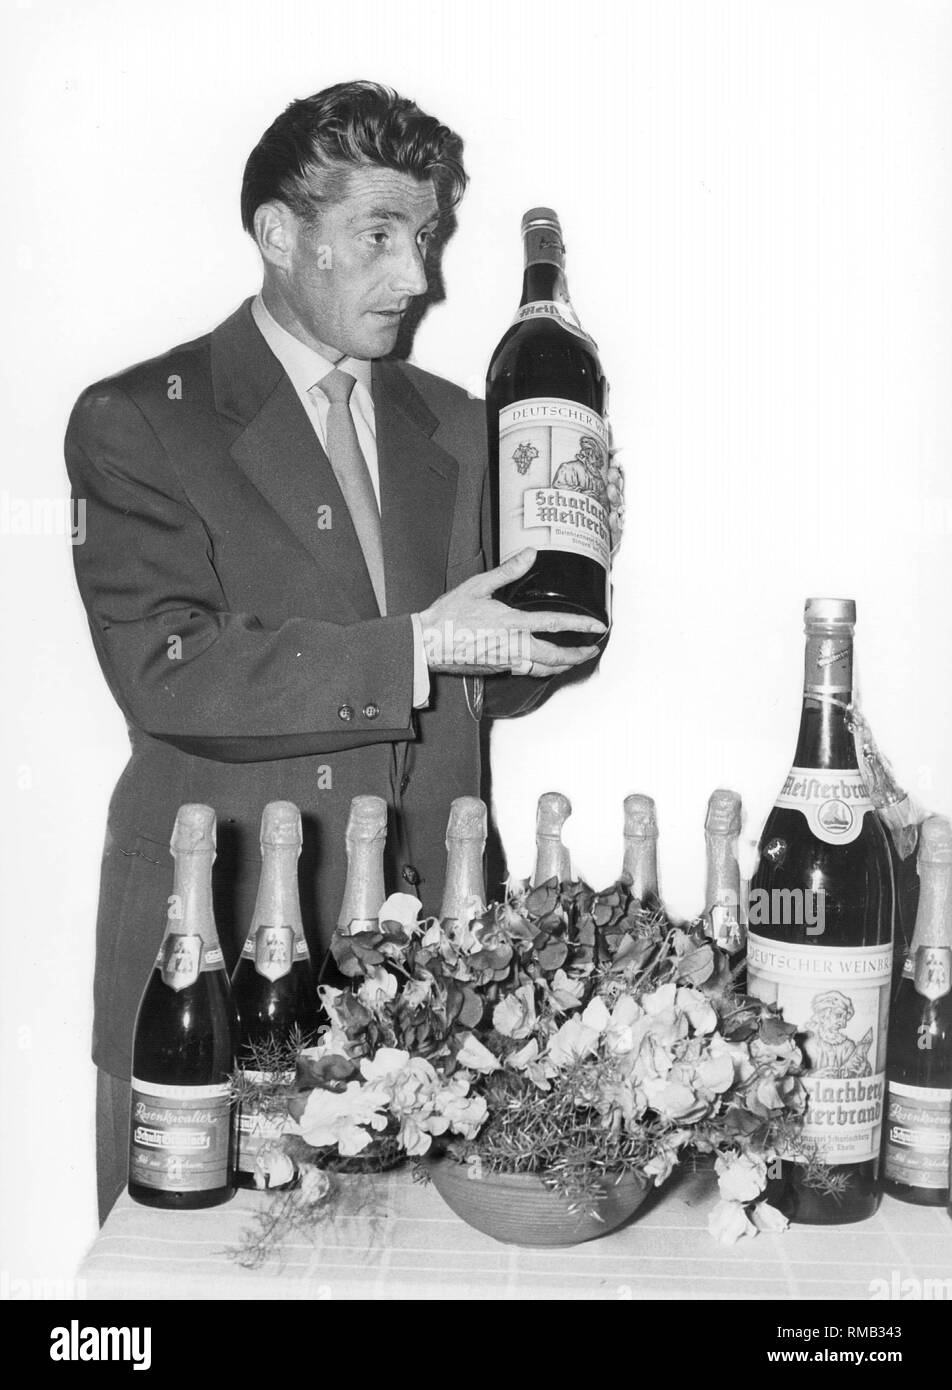 Fritz Walter presents sparkling wine at the reception of the national team in Lindau. In 1954, Germany won the FIFA World Cup for the first time in Switzerland. Stock Photo